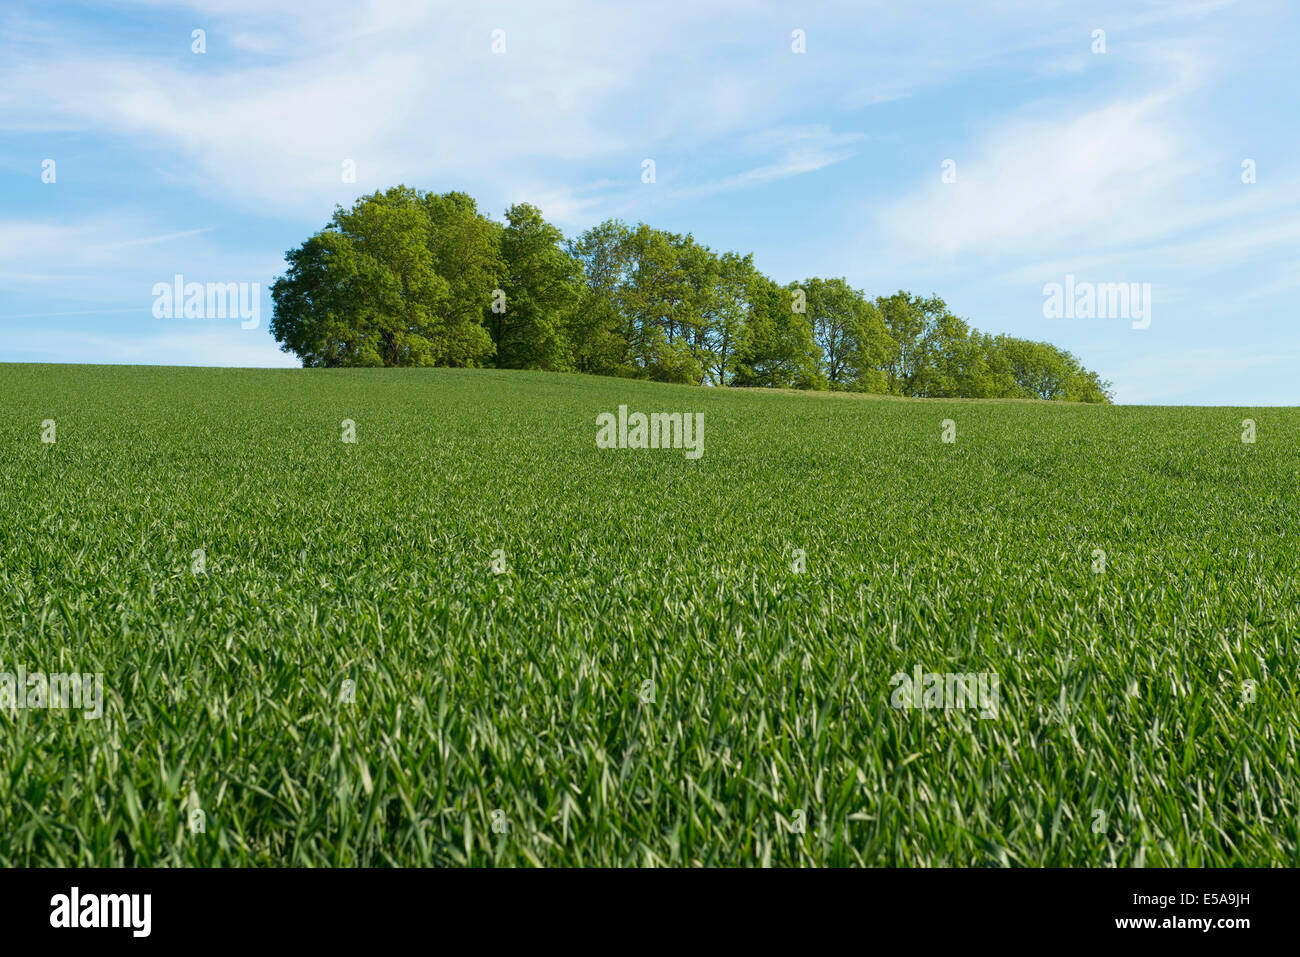 Wheat field and a grove, Thuringia, Germany Stock Photo